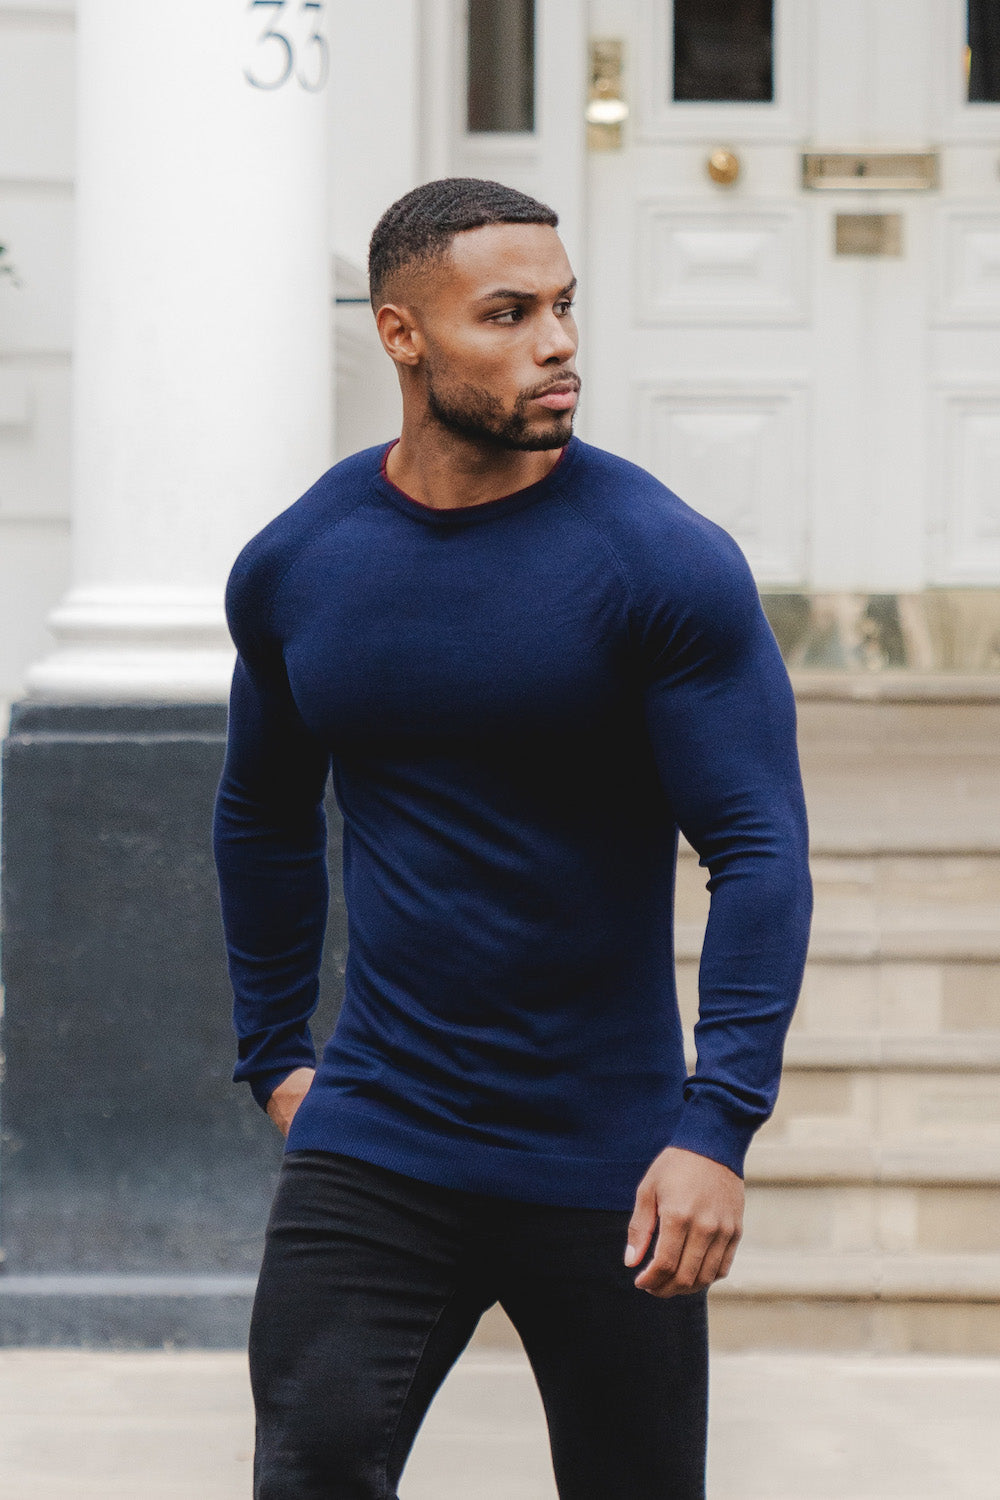 Tipped Crew Neck (LS) in Navy - TAILORED ATHLETE - ROW